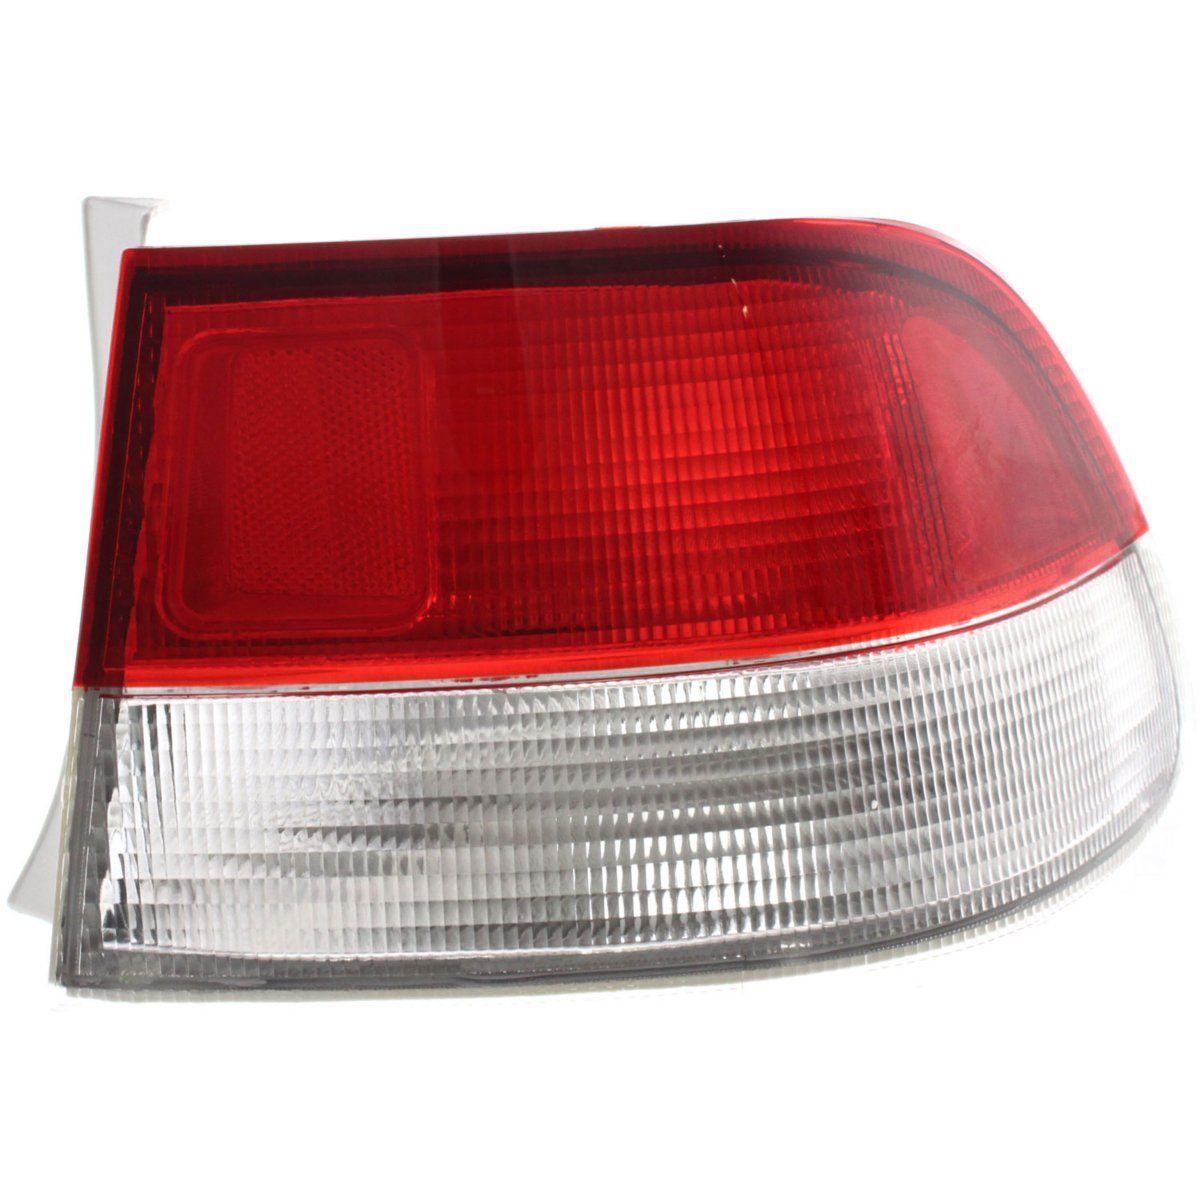 Halogen Tail Light For 19992000 Honda Civic Coupe Right